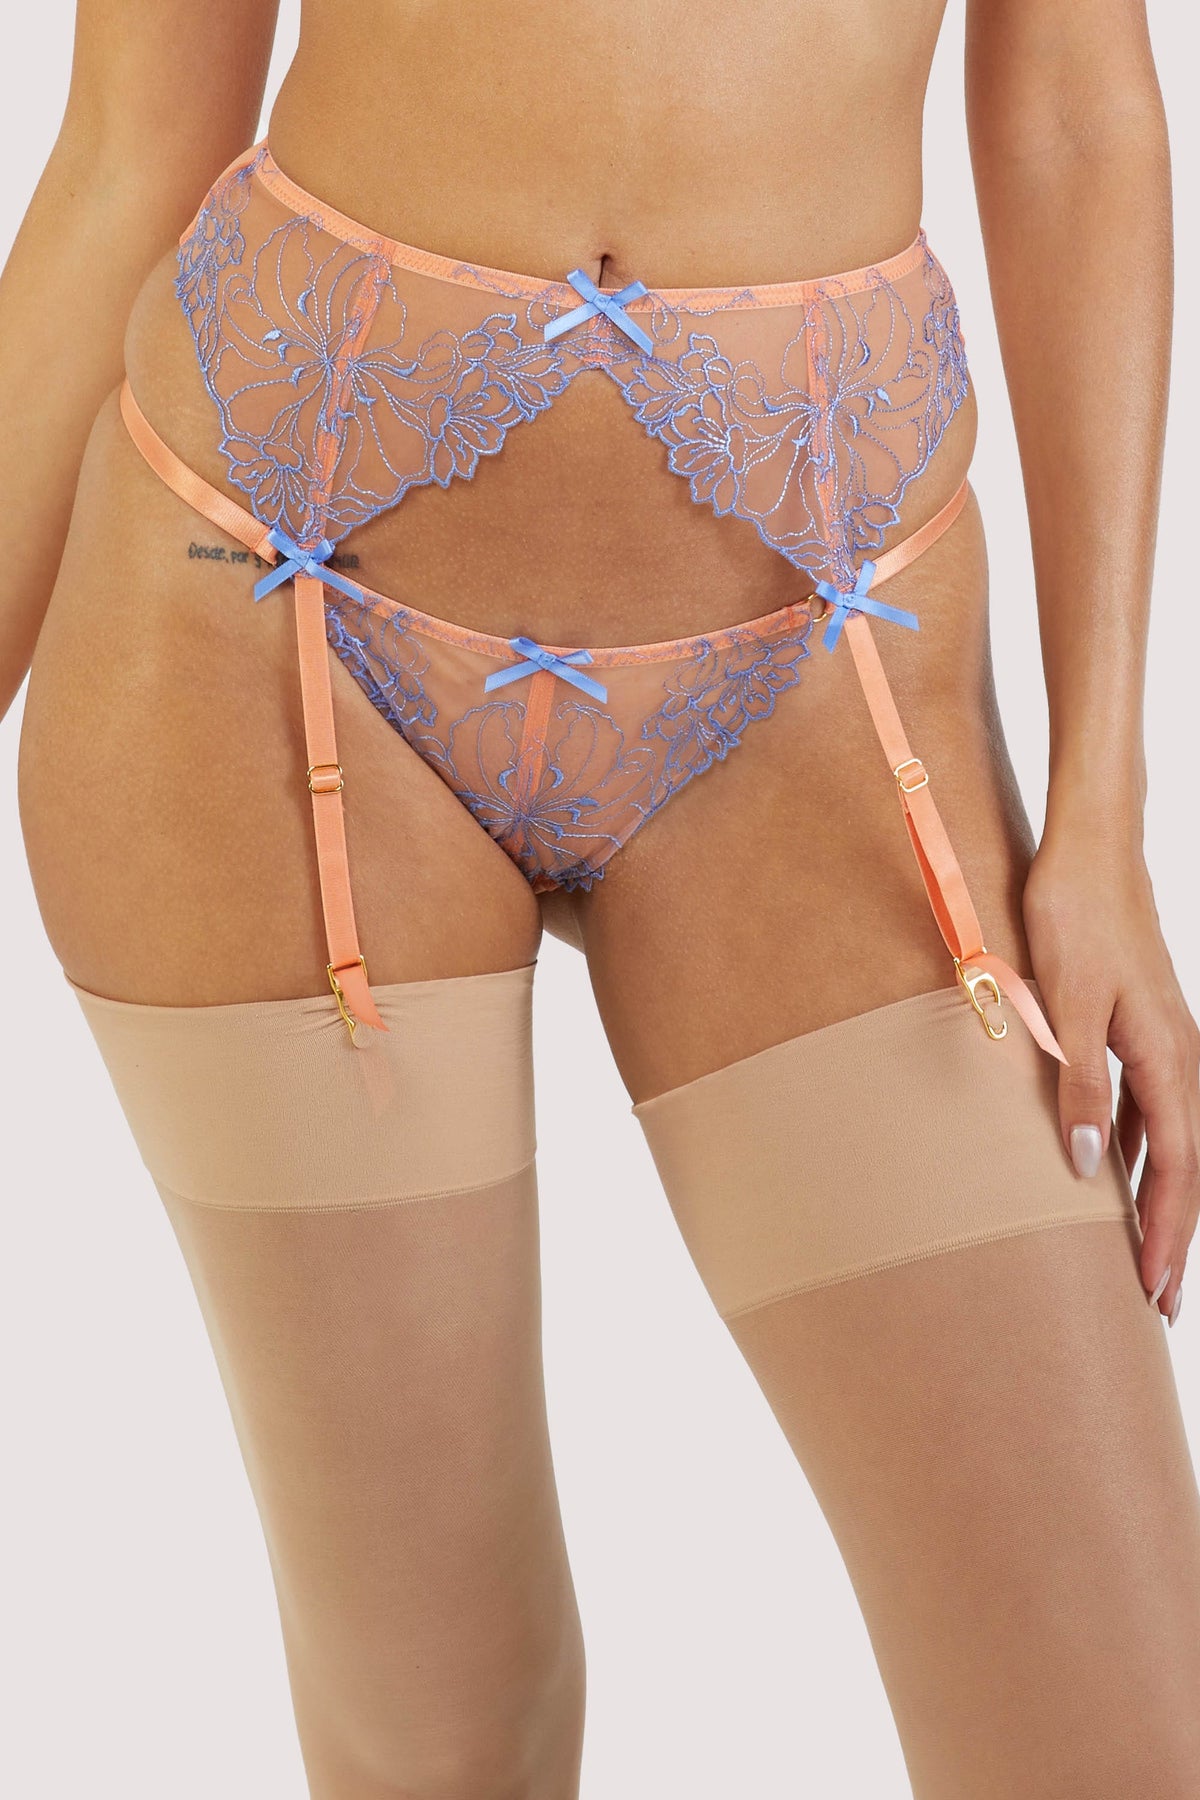 Orange mesh suspender with lacey blue-lilac detailing on the front.